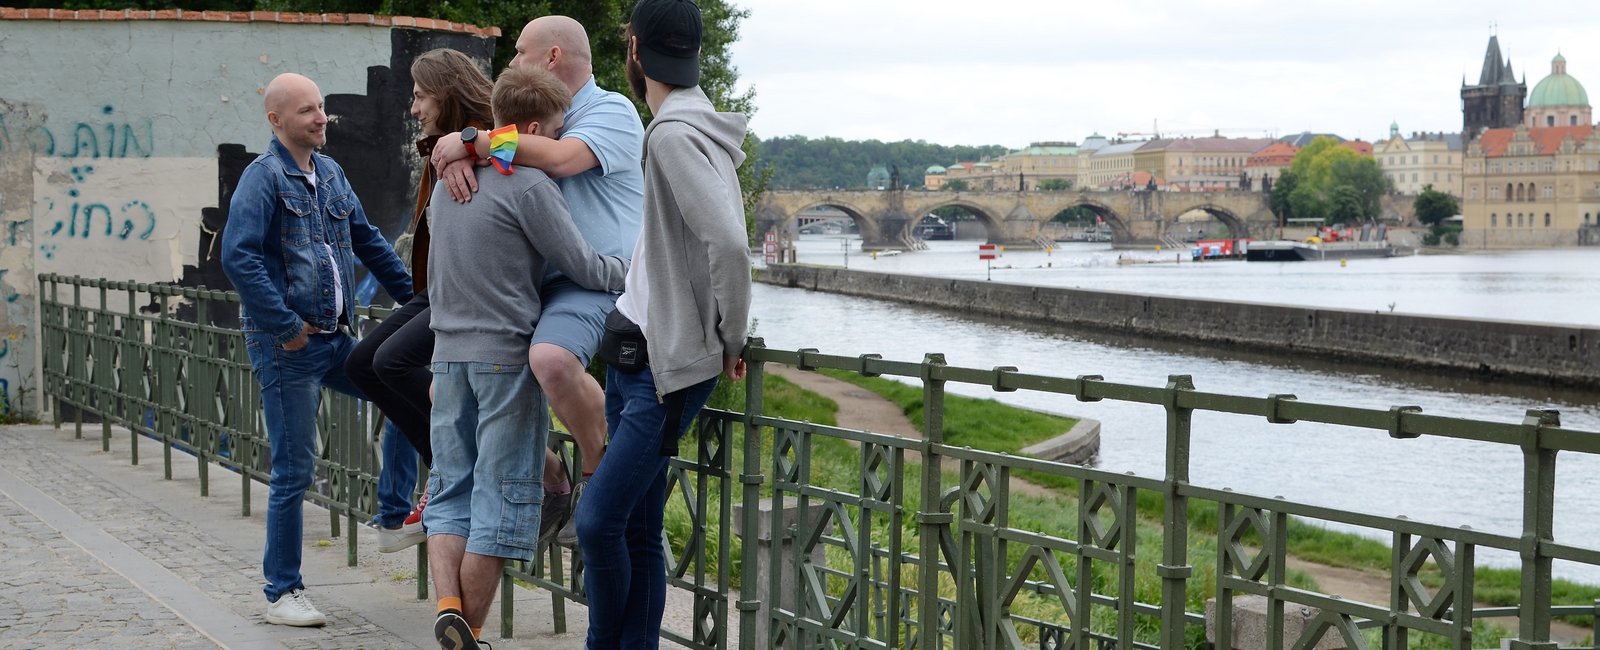 Find out what’s happening around you, where to have fun, where to meet new people, how to become a part of the Czech LGBT community or where to find help in difficult life situations.